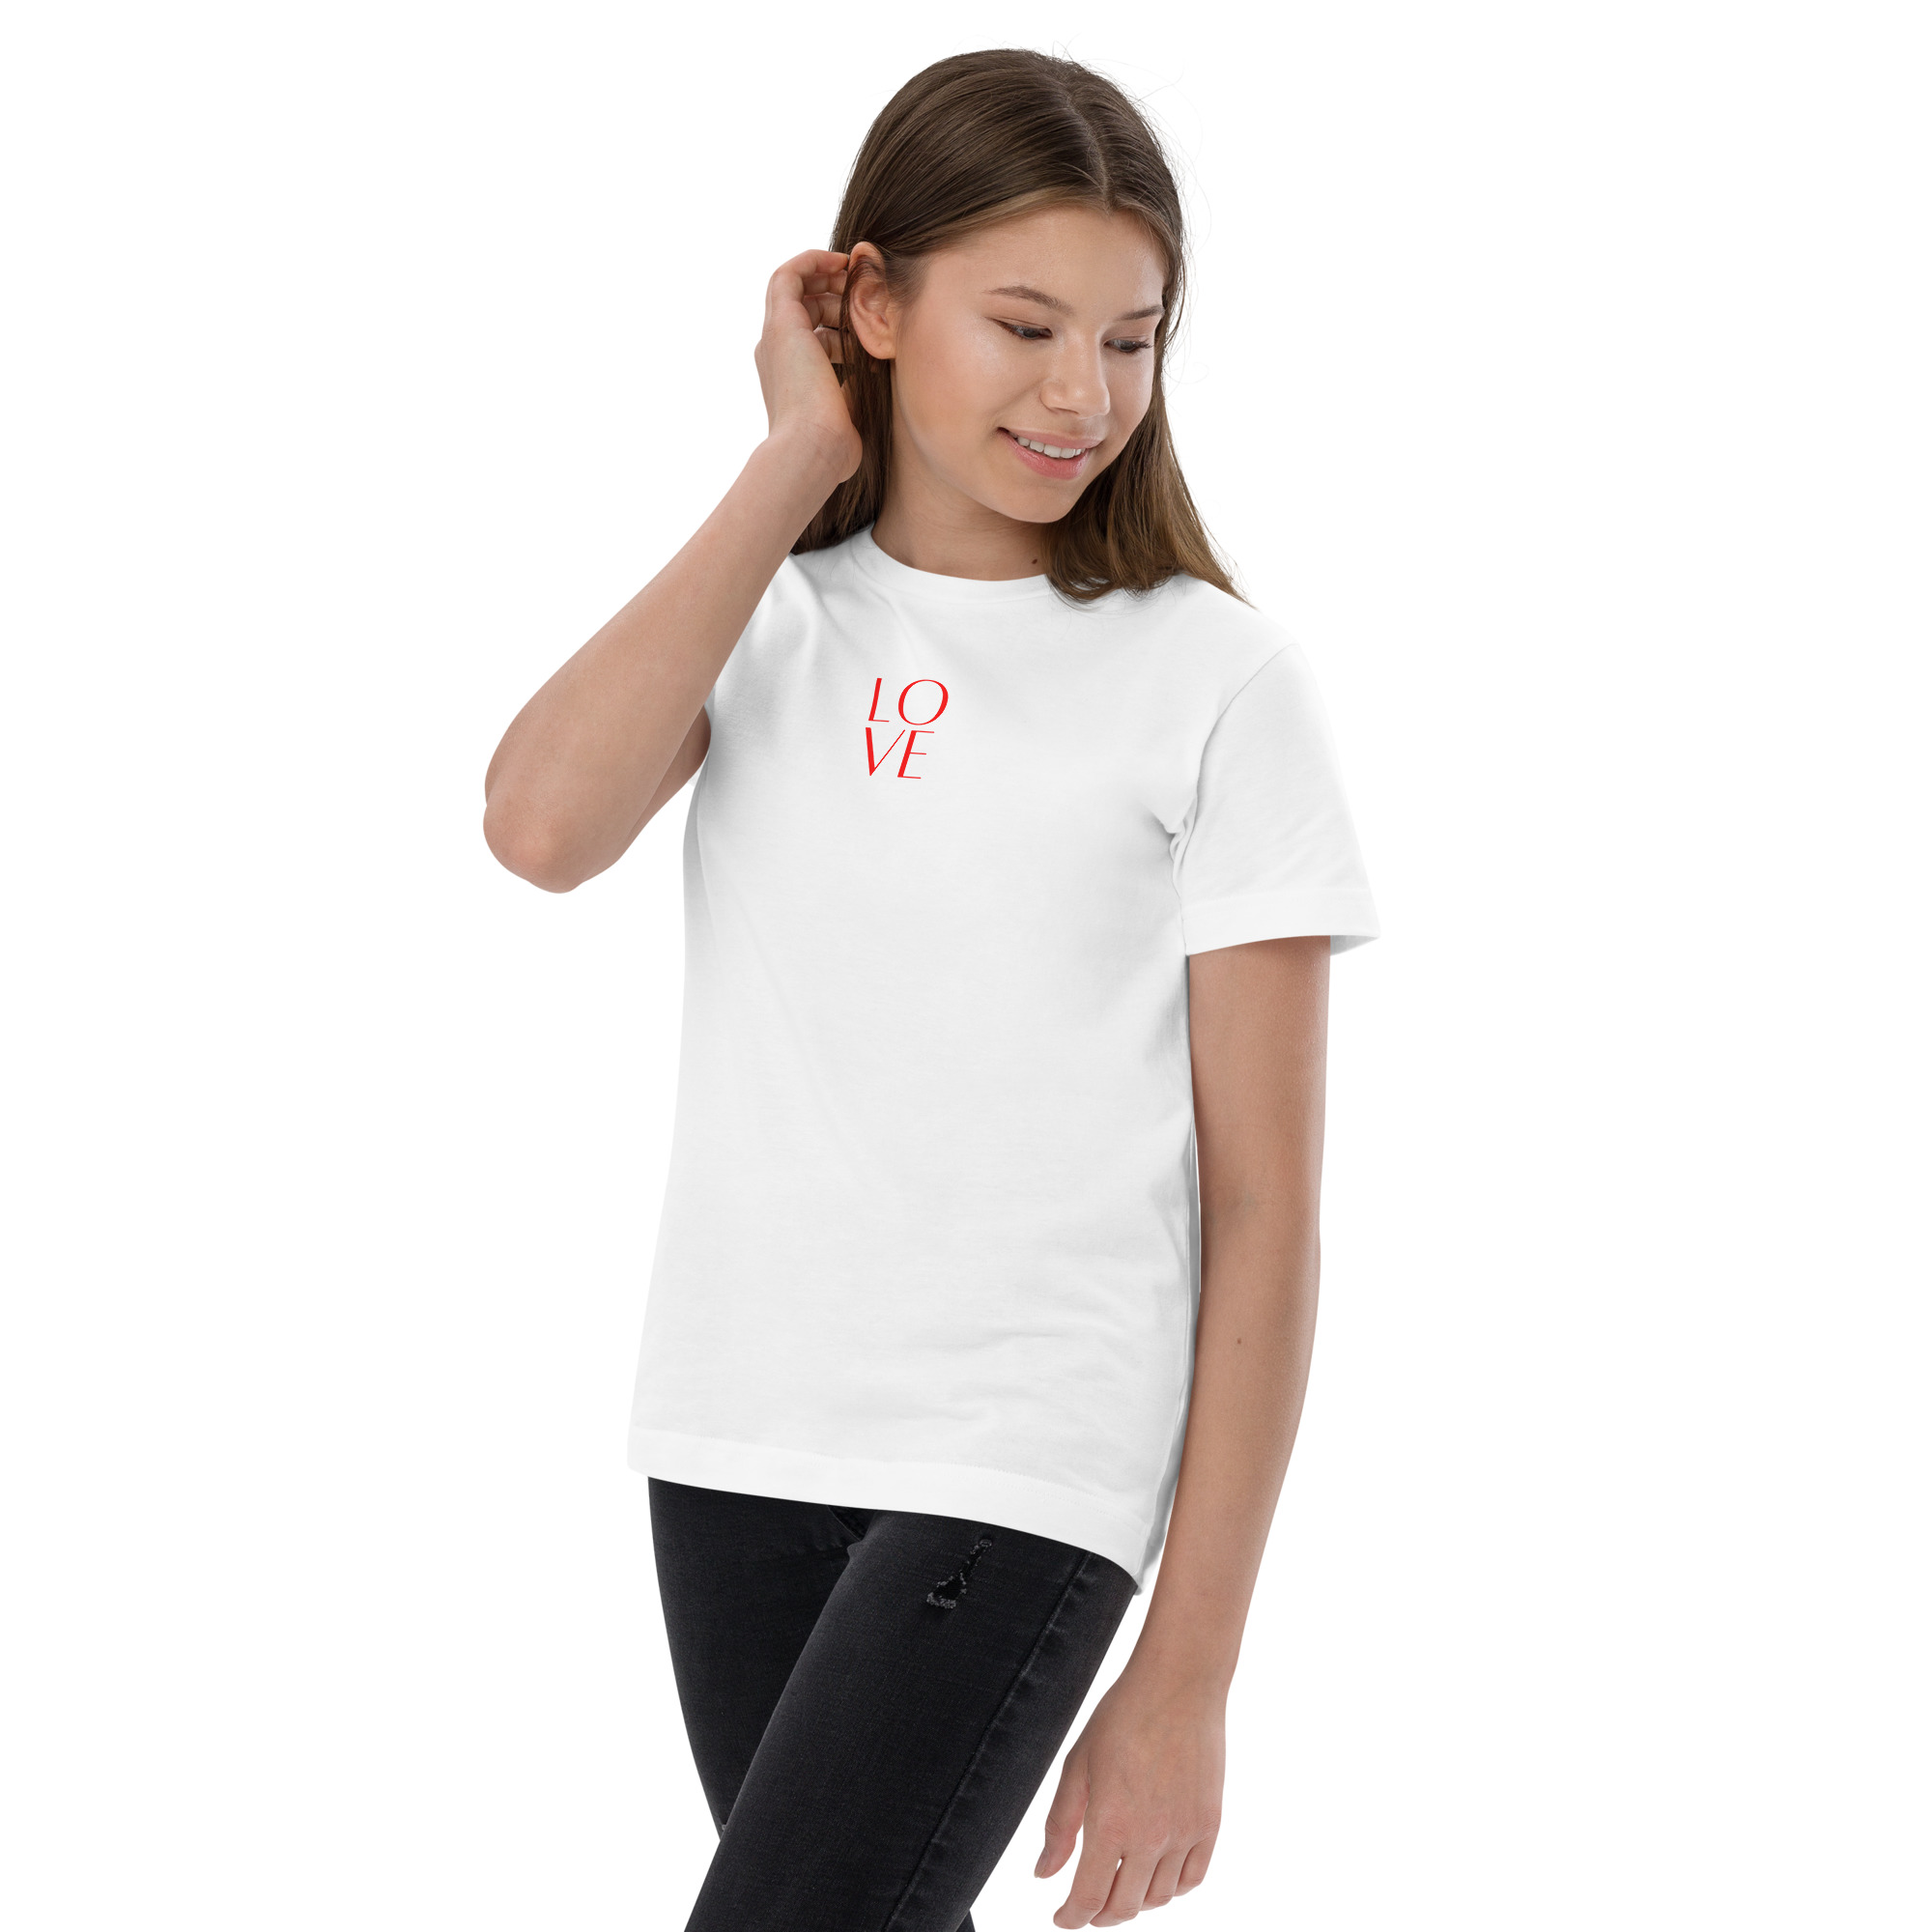 youth-jersey-t-shirt-white-left-front-6384cb2a1e489.jpg